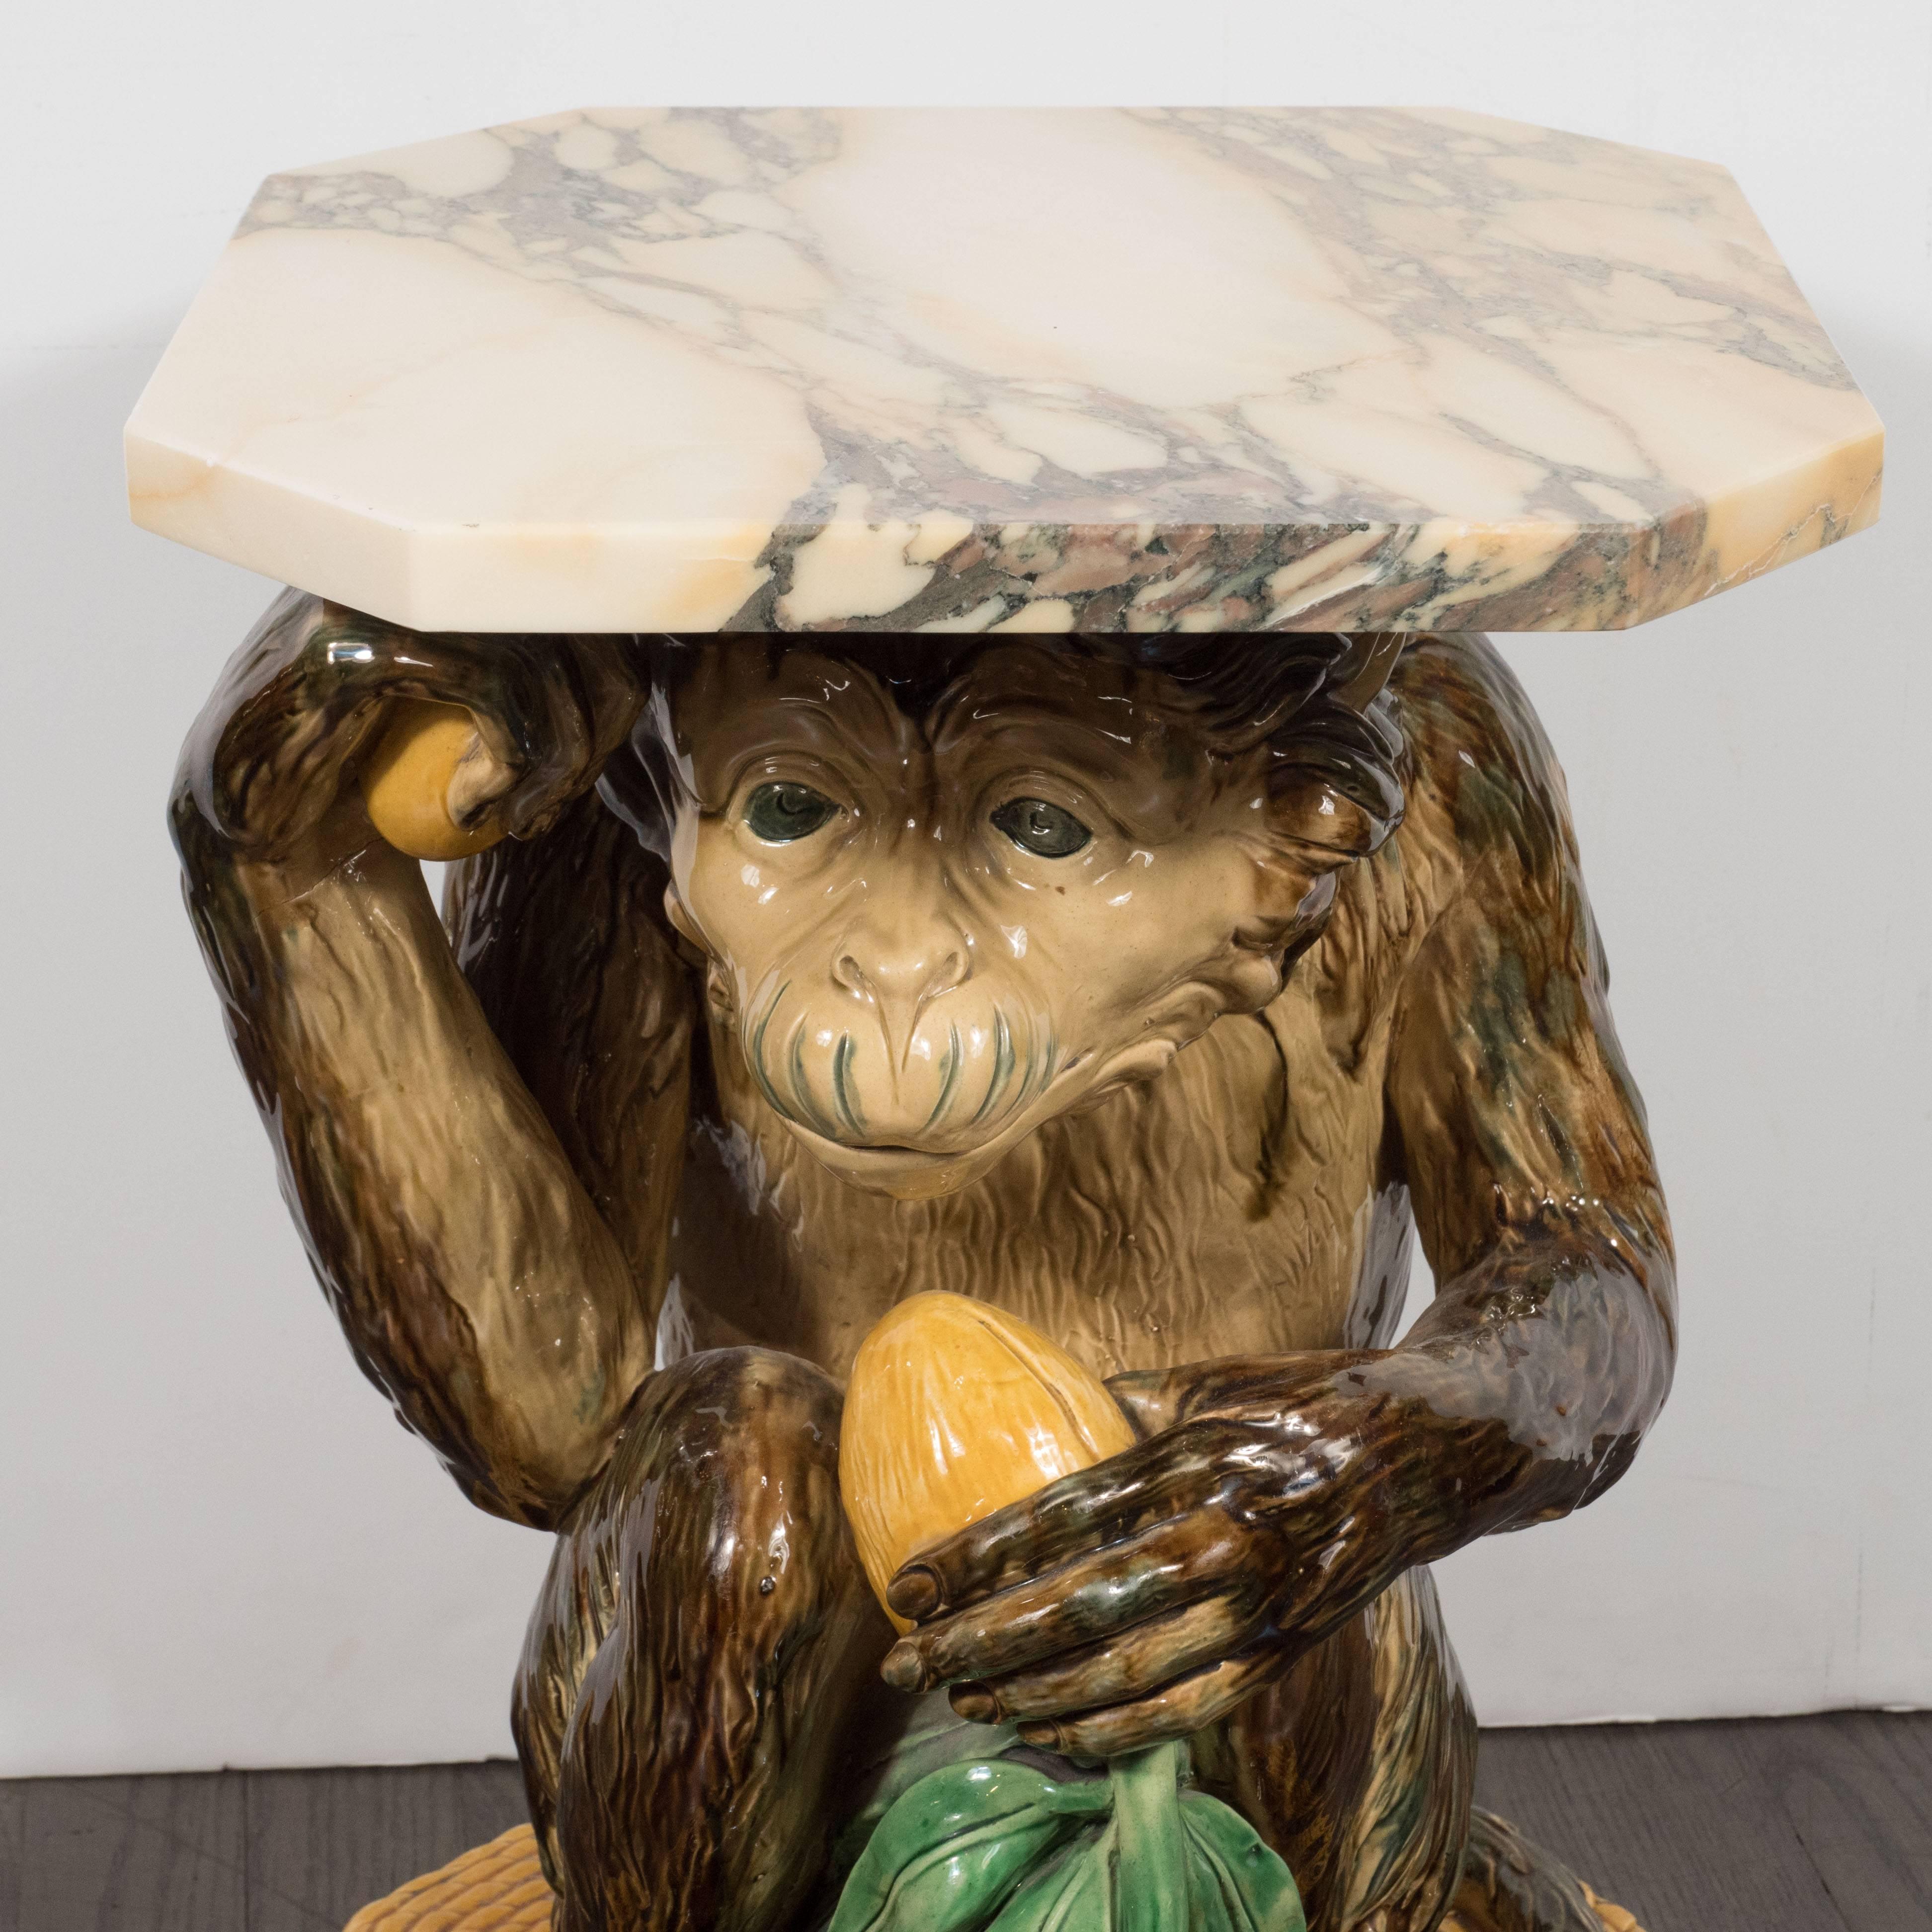 This whimsical occasional table was fabricated by Minton of England roughly 150 years ago. It features a crouching monkey holding a mango in each hand. The oblong piece of citrine skinned fruit in his left hand includes long emerald colored leaves